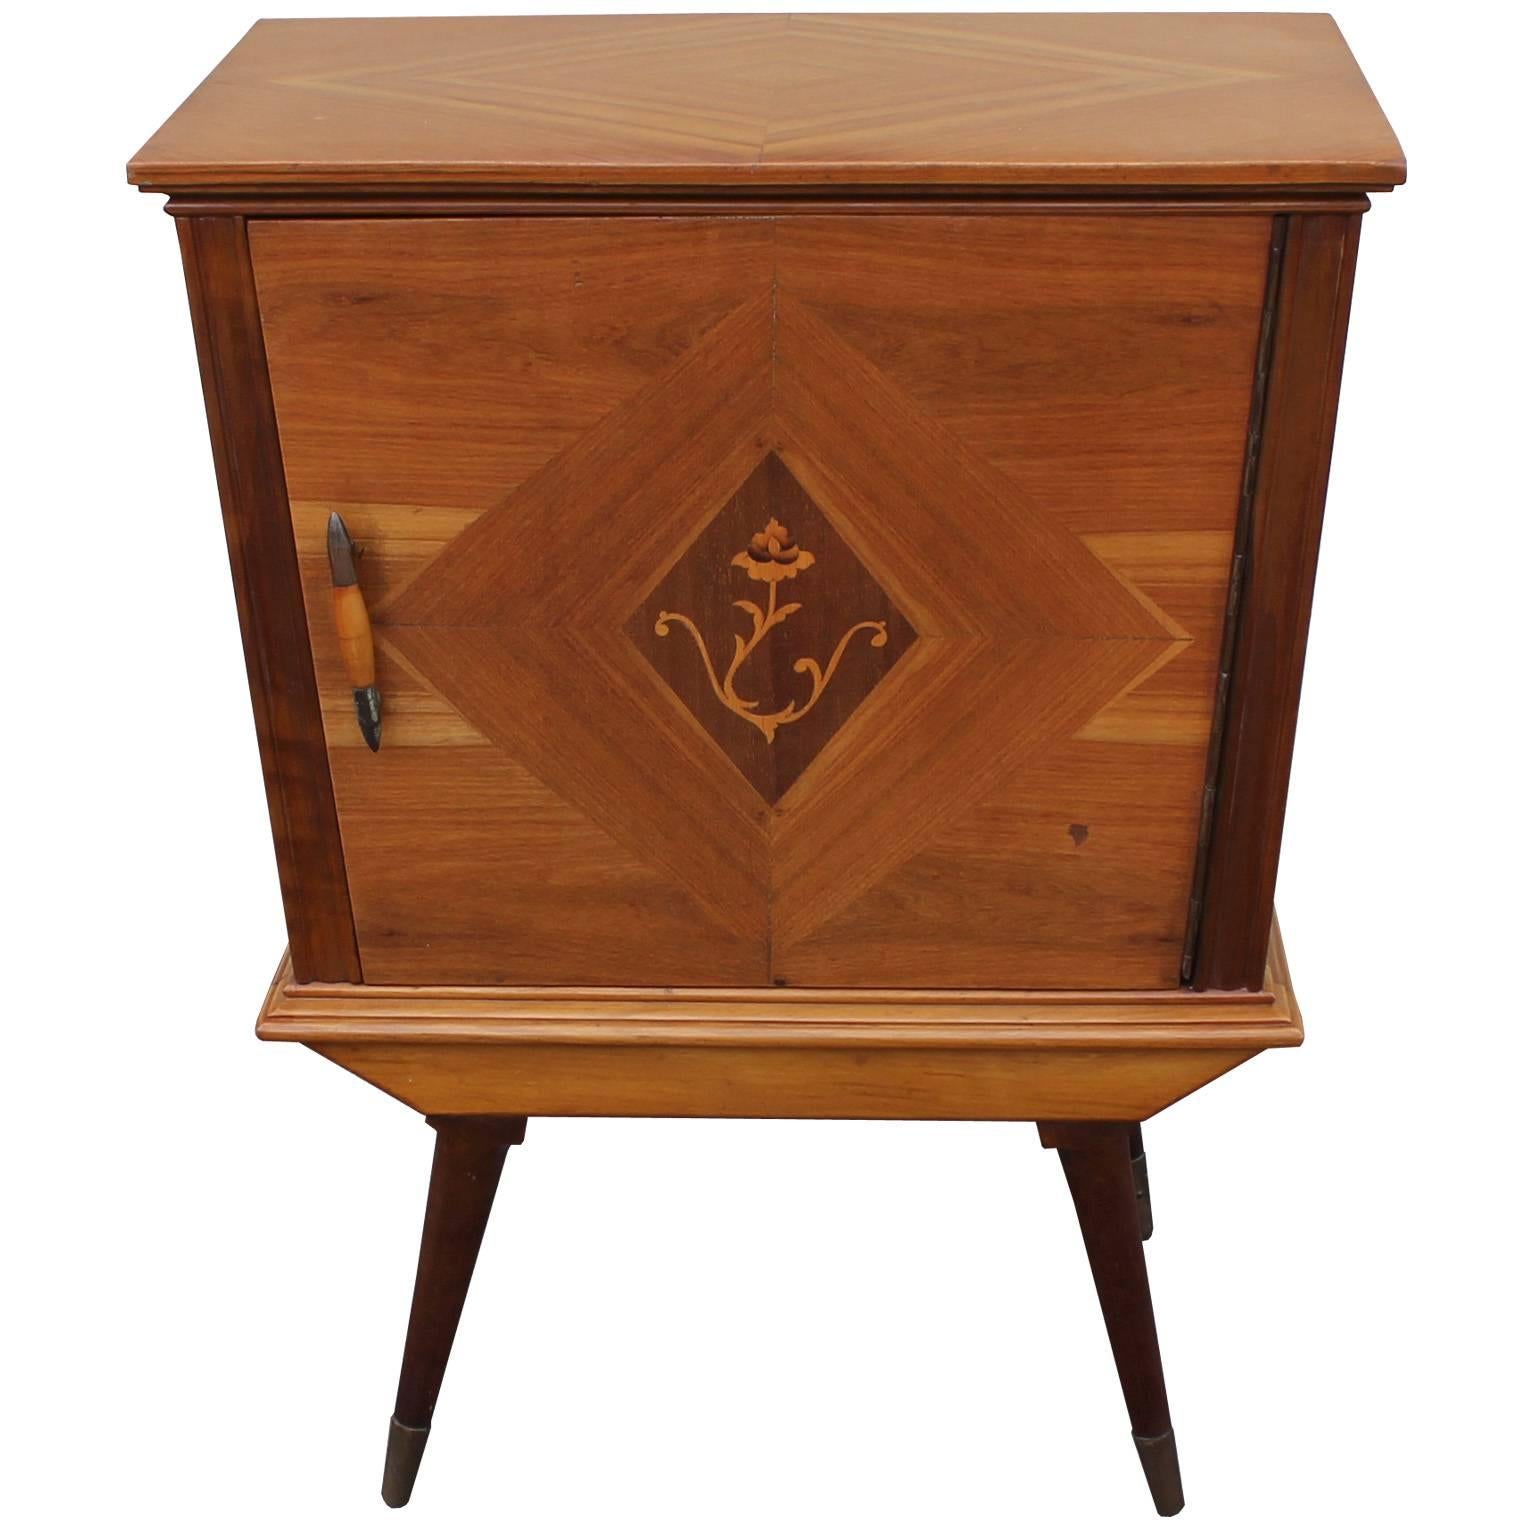 Pair of sophisticated and intricate Italian nightstands or bedside tables. Tables feature beautifully inlaid wood. Cabinets front feature a flower motif. Brass and wood spear pull. Tapered and splayed legs capped in brass complete the piece.